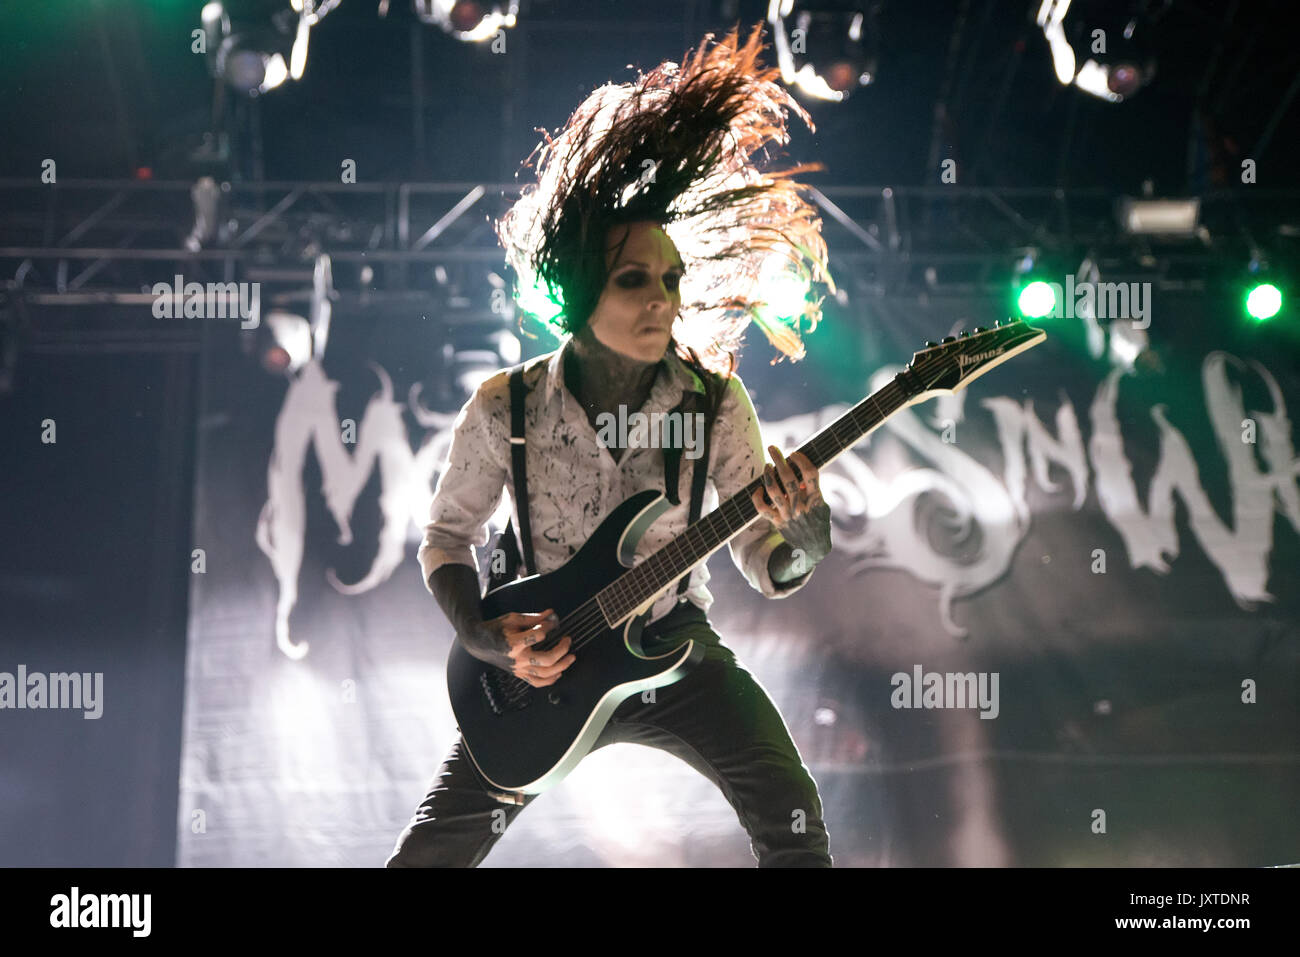 MADRID - JUN 22: Motionless in White (metalcore music band) perform in concert at Download (heavy metal music festival) on June 22, 2017 in Madrid. Stock Photo